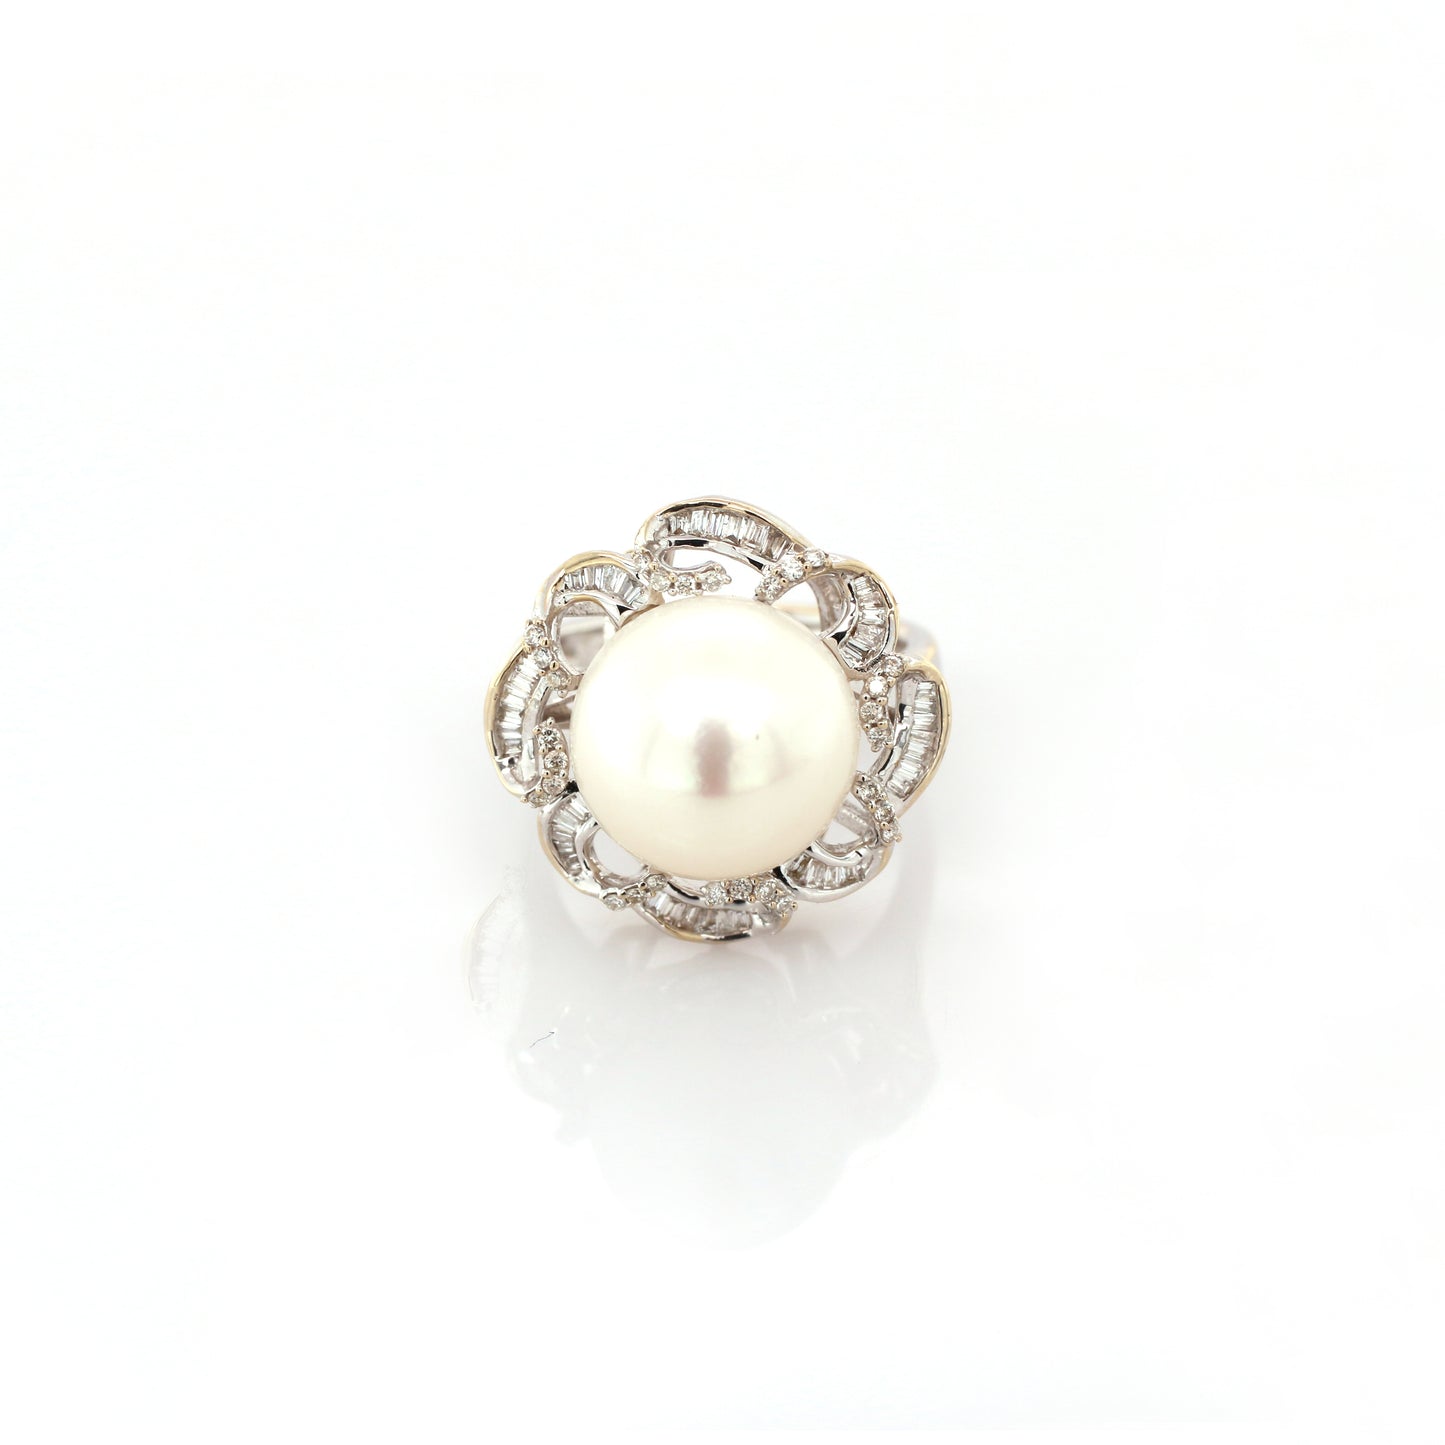 18k White Gold Diamond Ring With Pearl